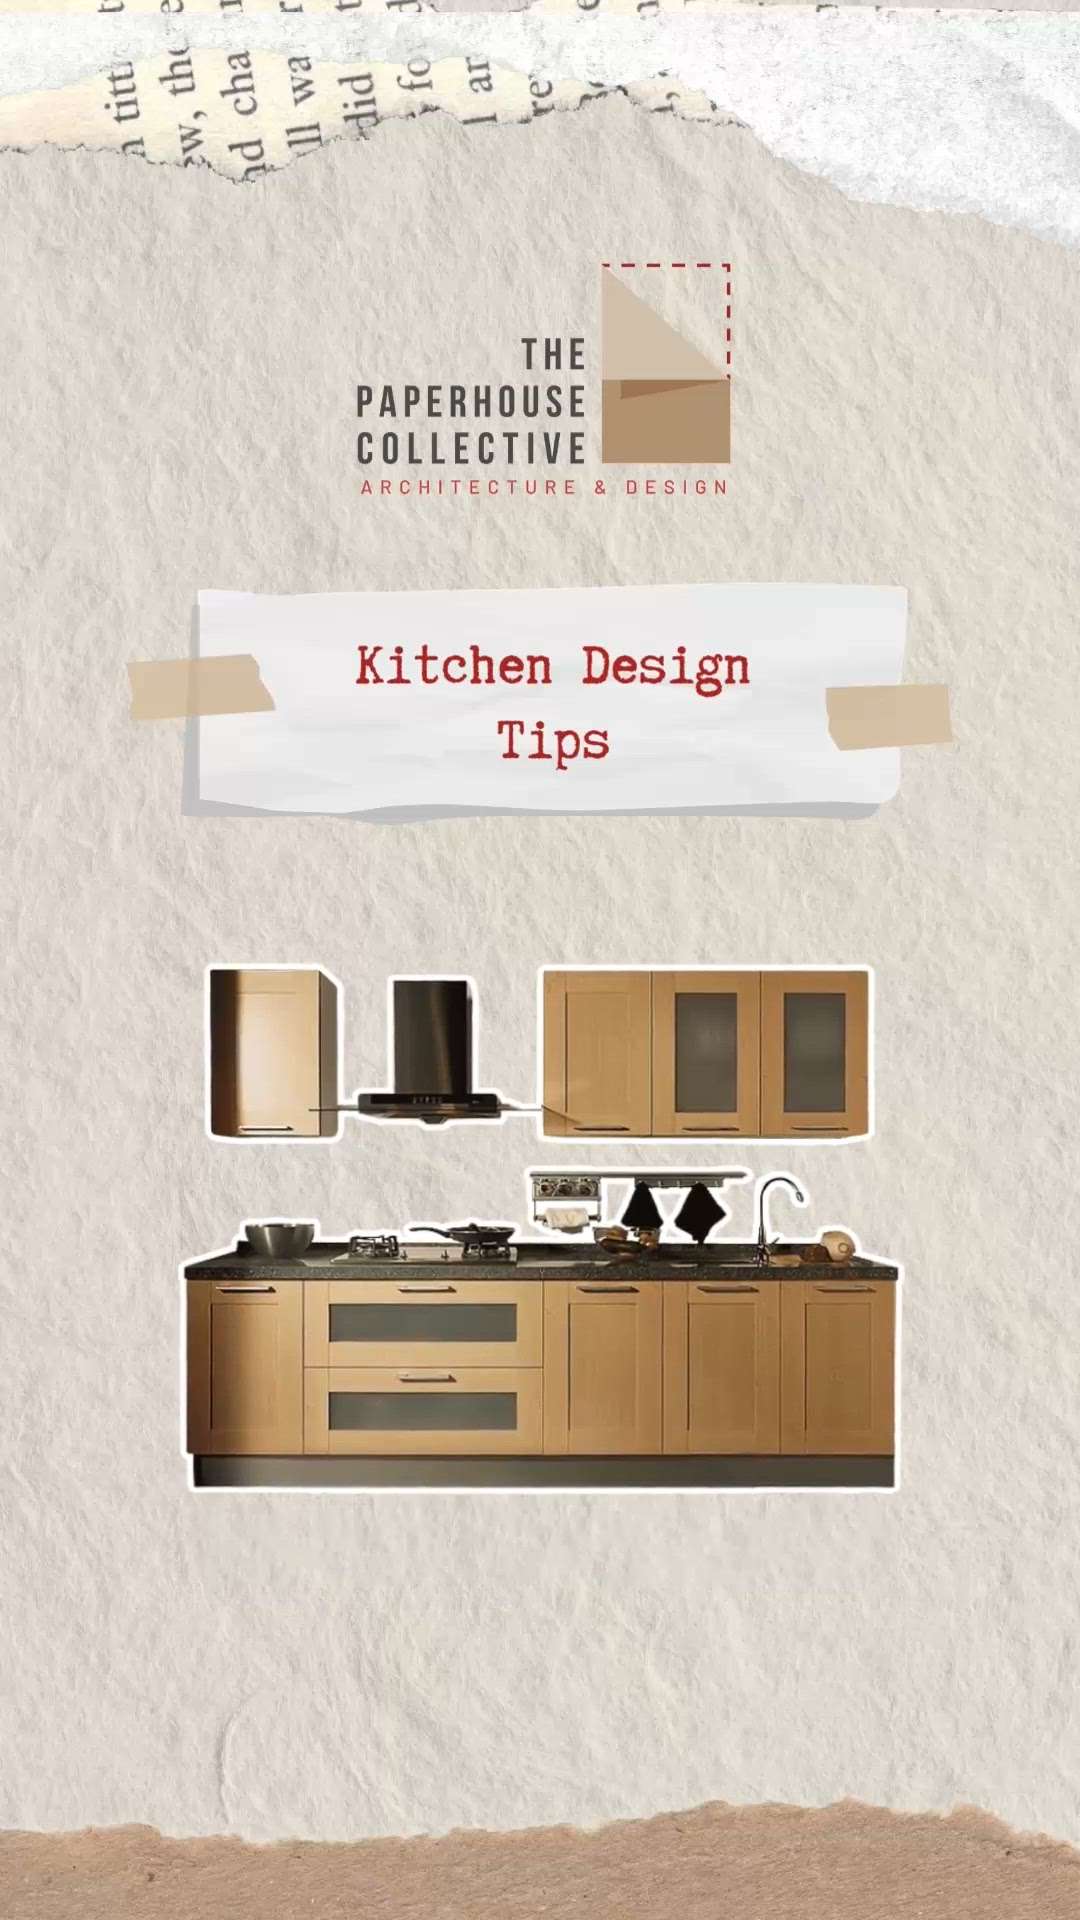 Here are some tips that you can use to design, improve or build your kitchen the best way possible in your home. We have made this video keeping in mind the long term functionality, durability and aesthetics of a kitchen while also keeping in mind the budget. 
If you found this useful, do like and share this. 

#creatorsofkolo #top3 #kitchenideas #modernhomes #ideas #KitchenIdeas  #budget #InteriorDesigner  #KitchenCabinet